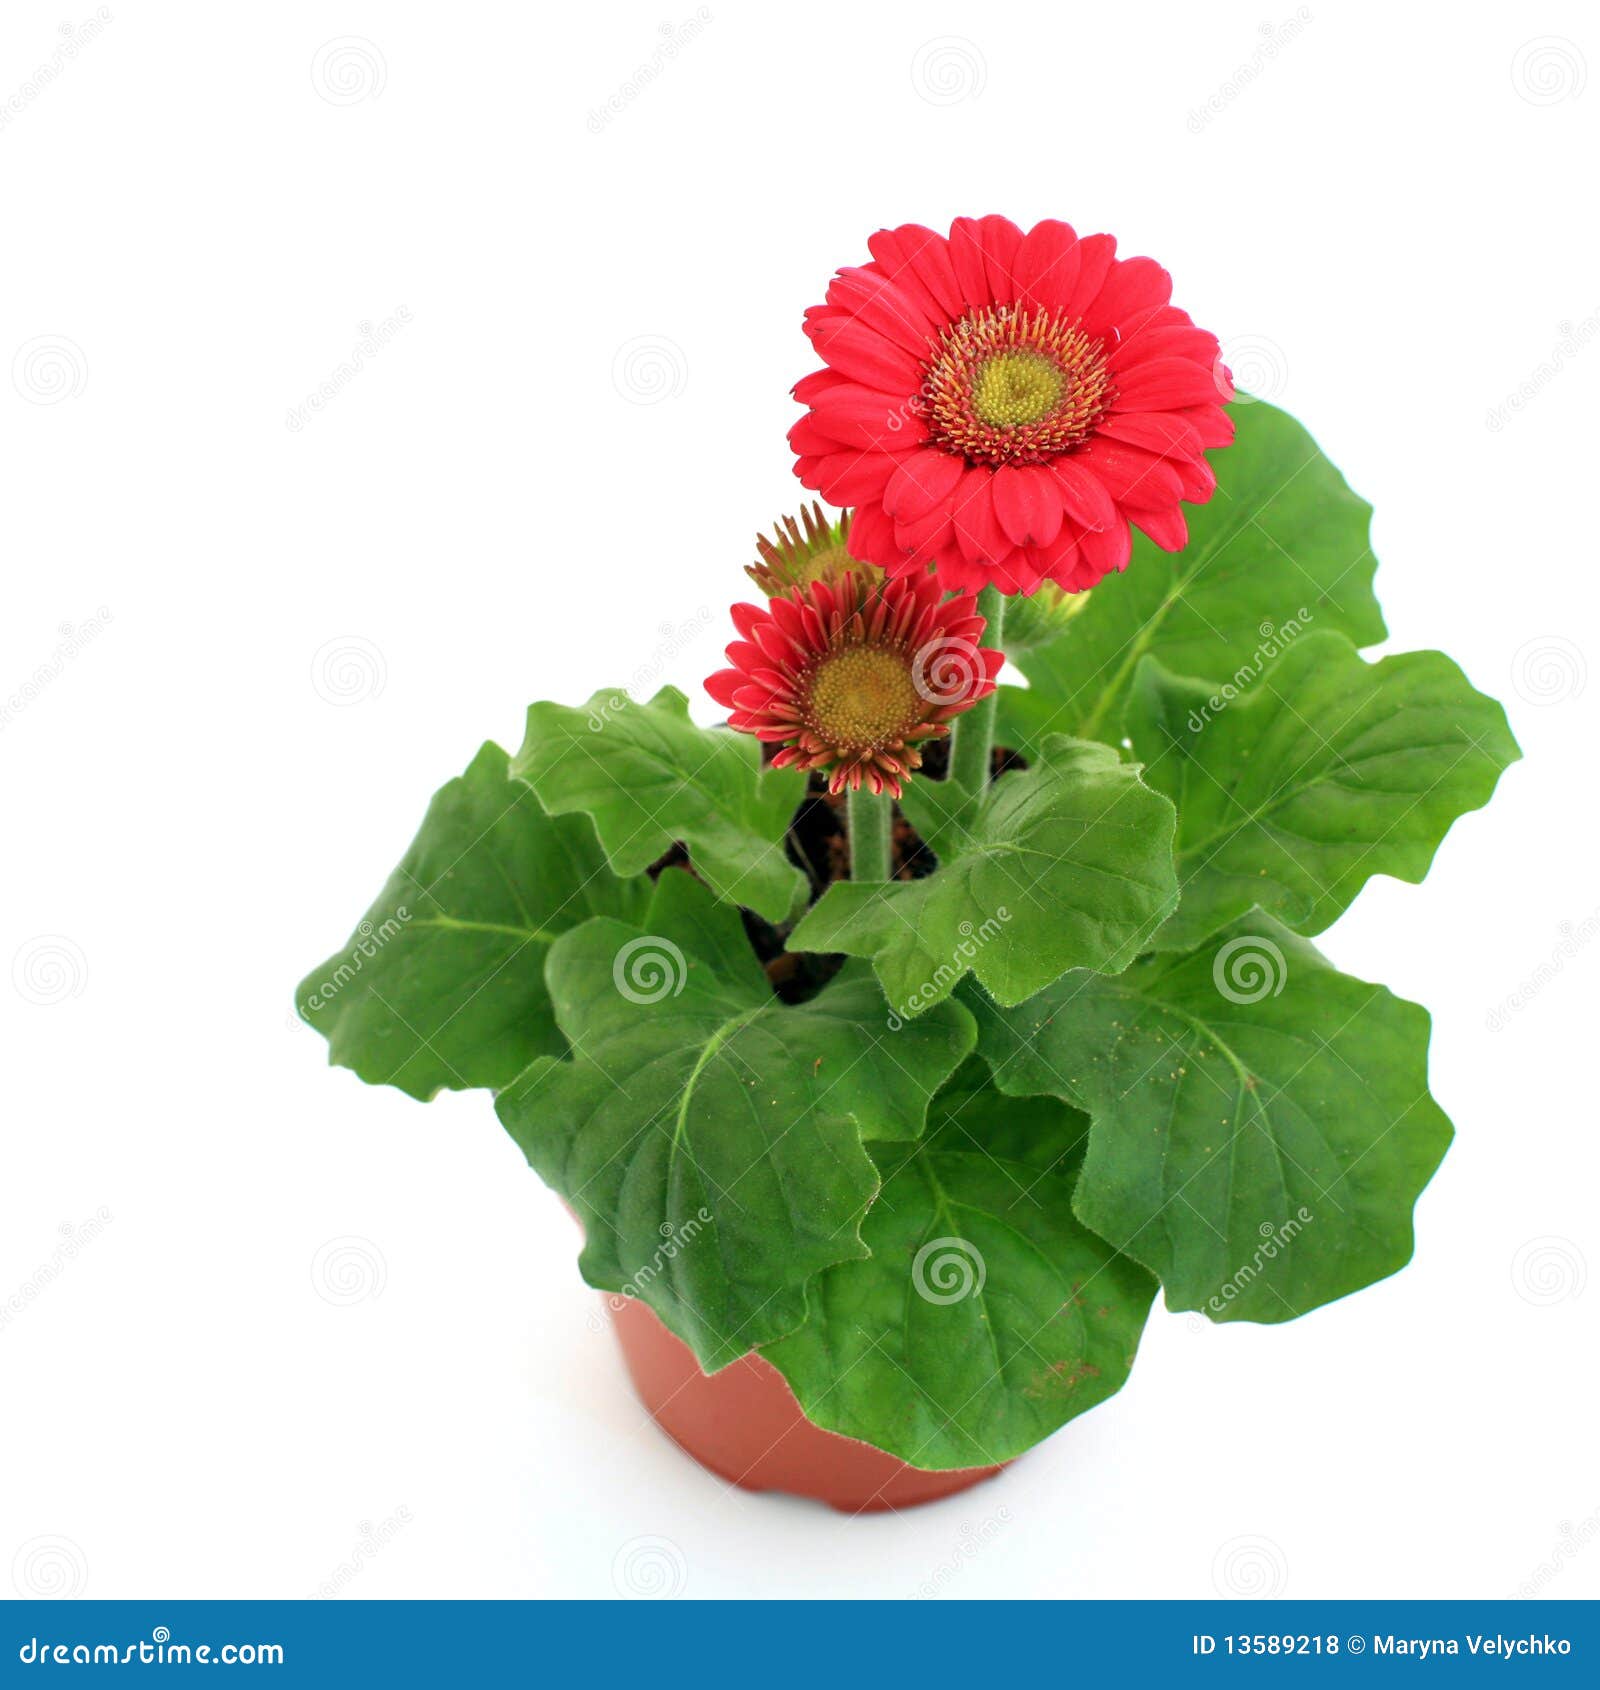 Red flowers stock photo. Image of flower, potted, nature - 13589218